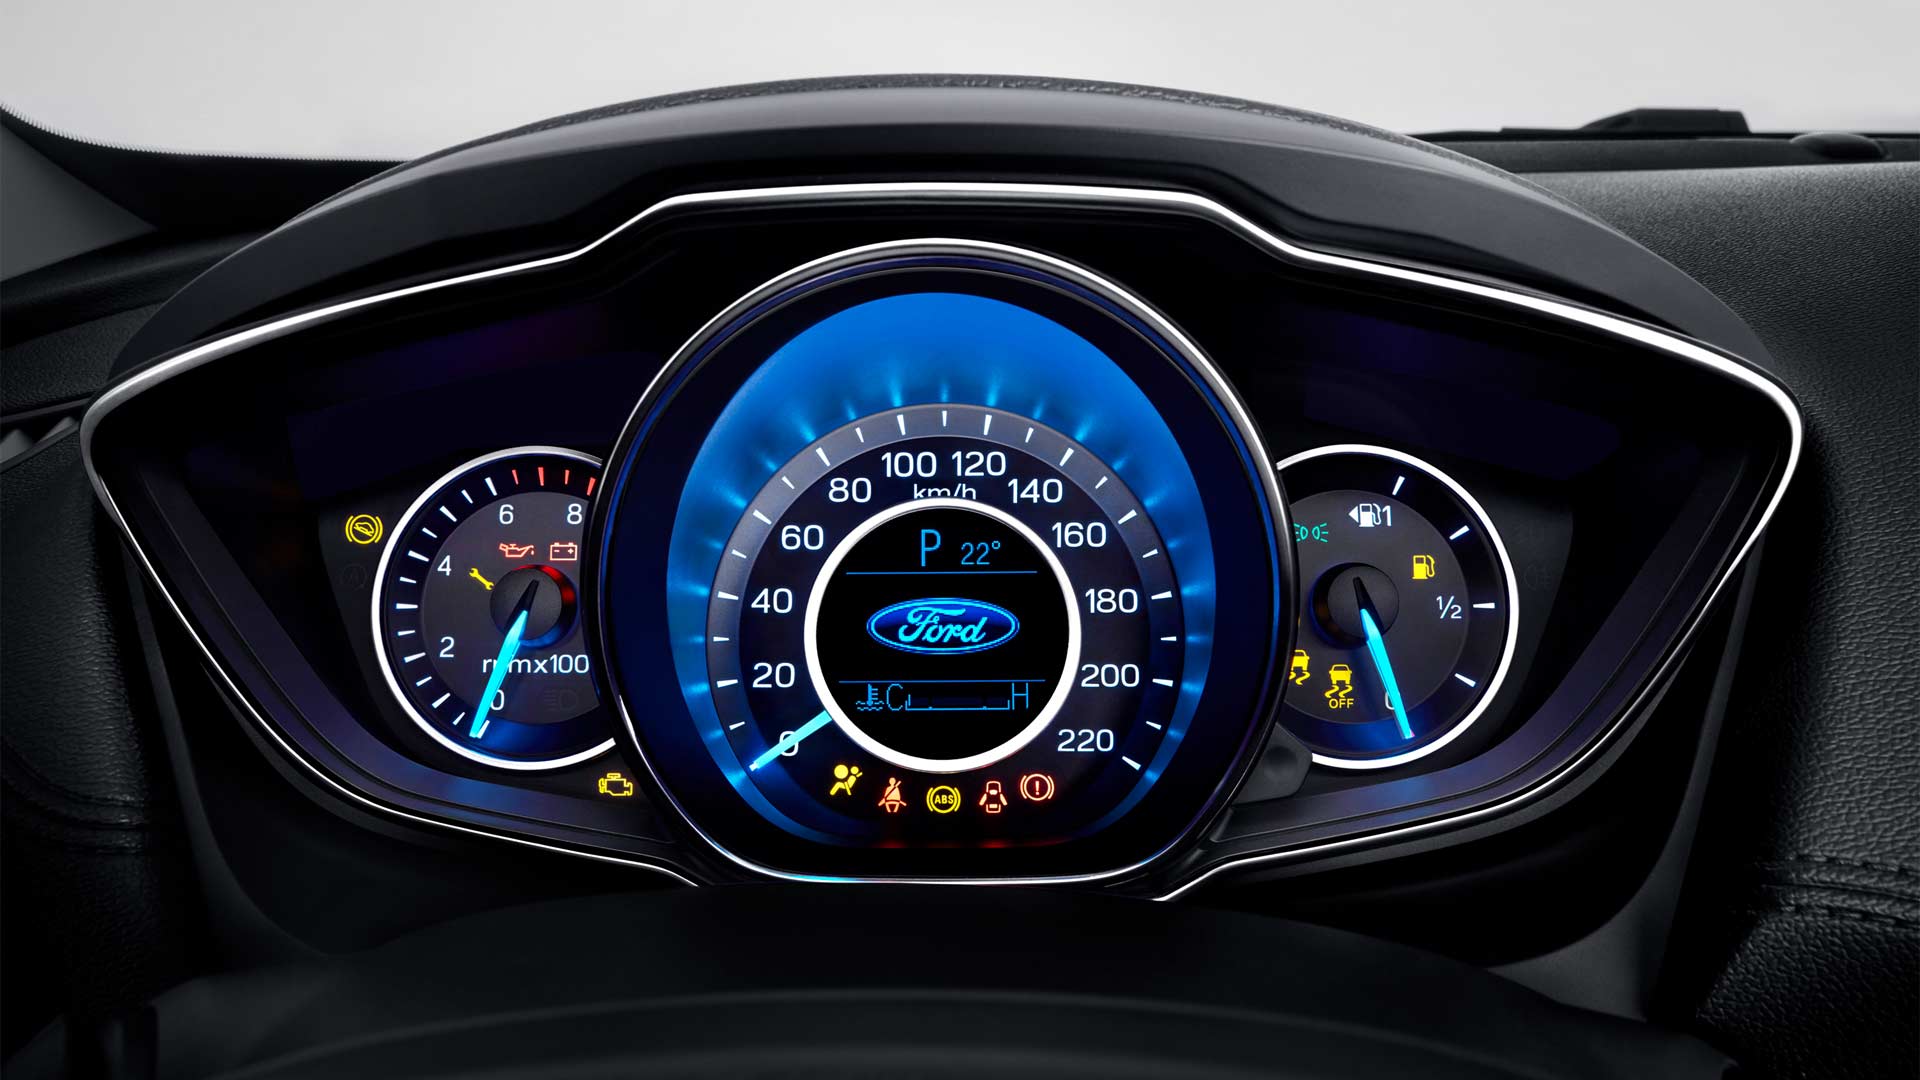 2018-Ford-Escort-China-instrument-cluster